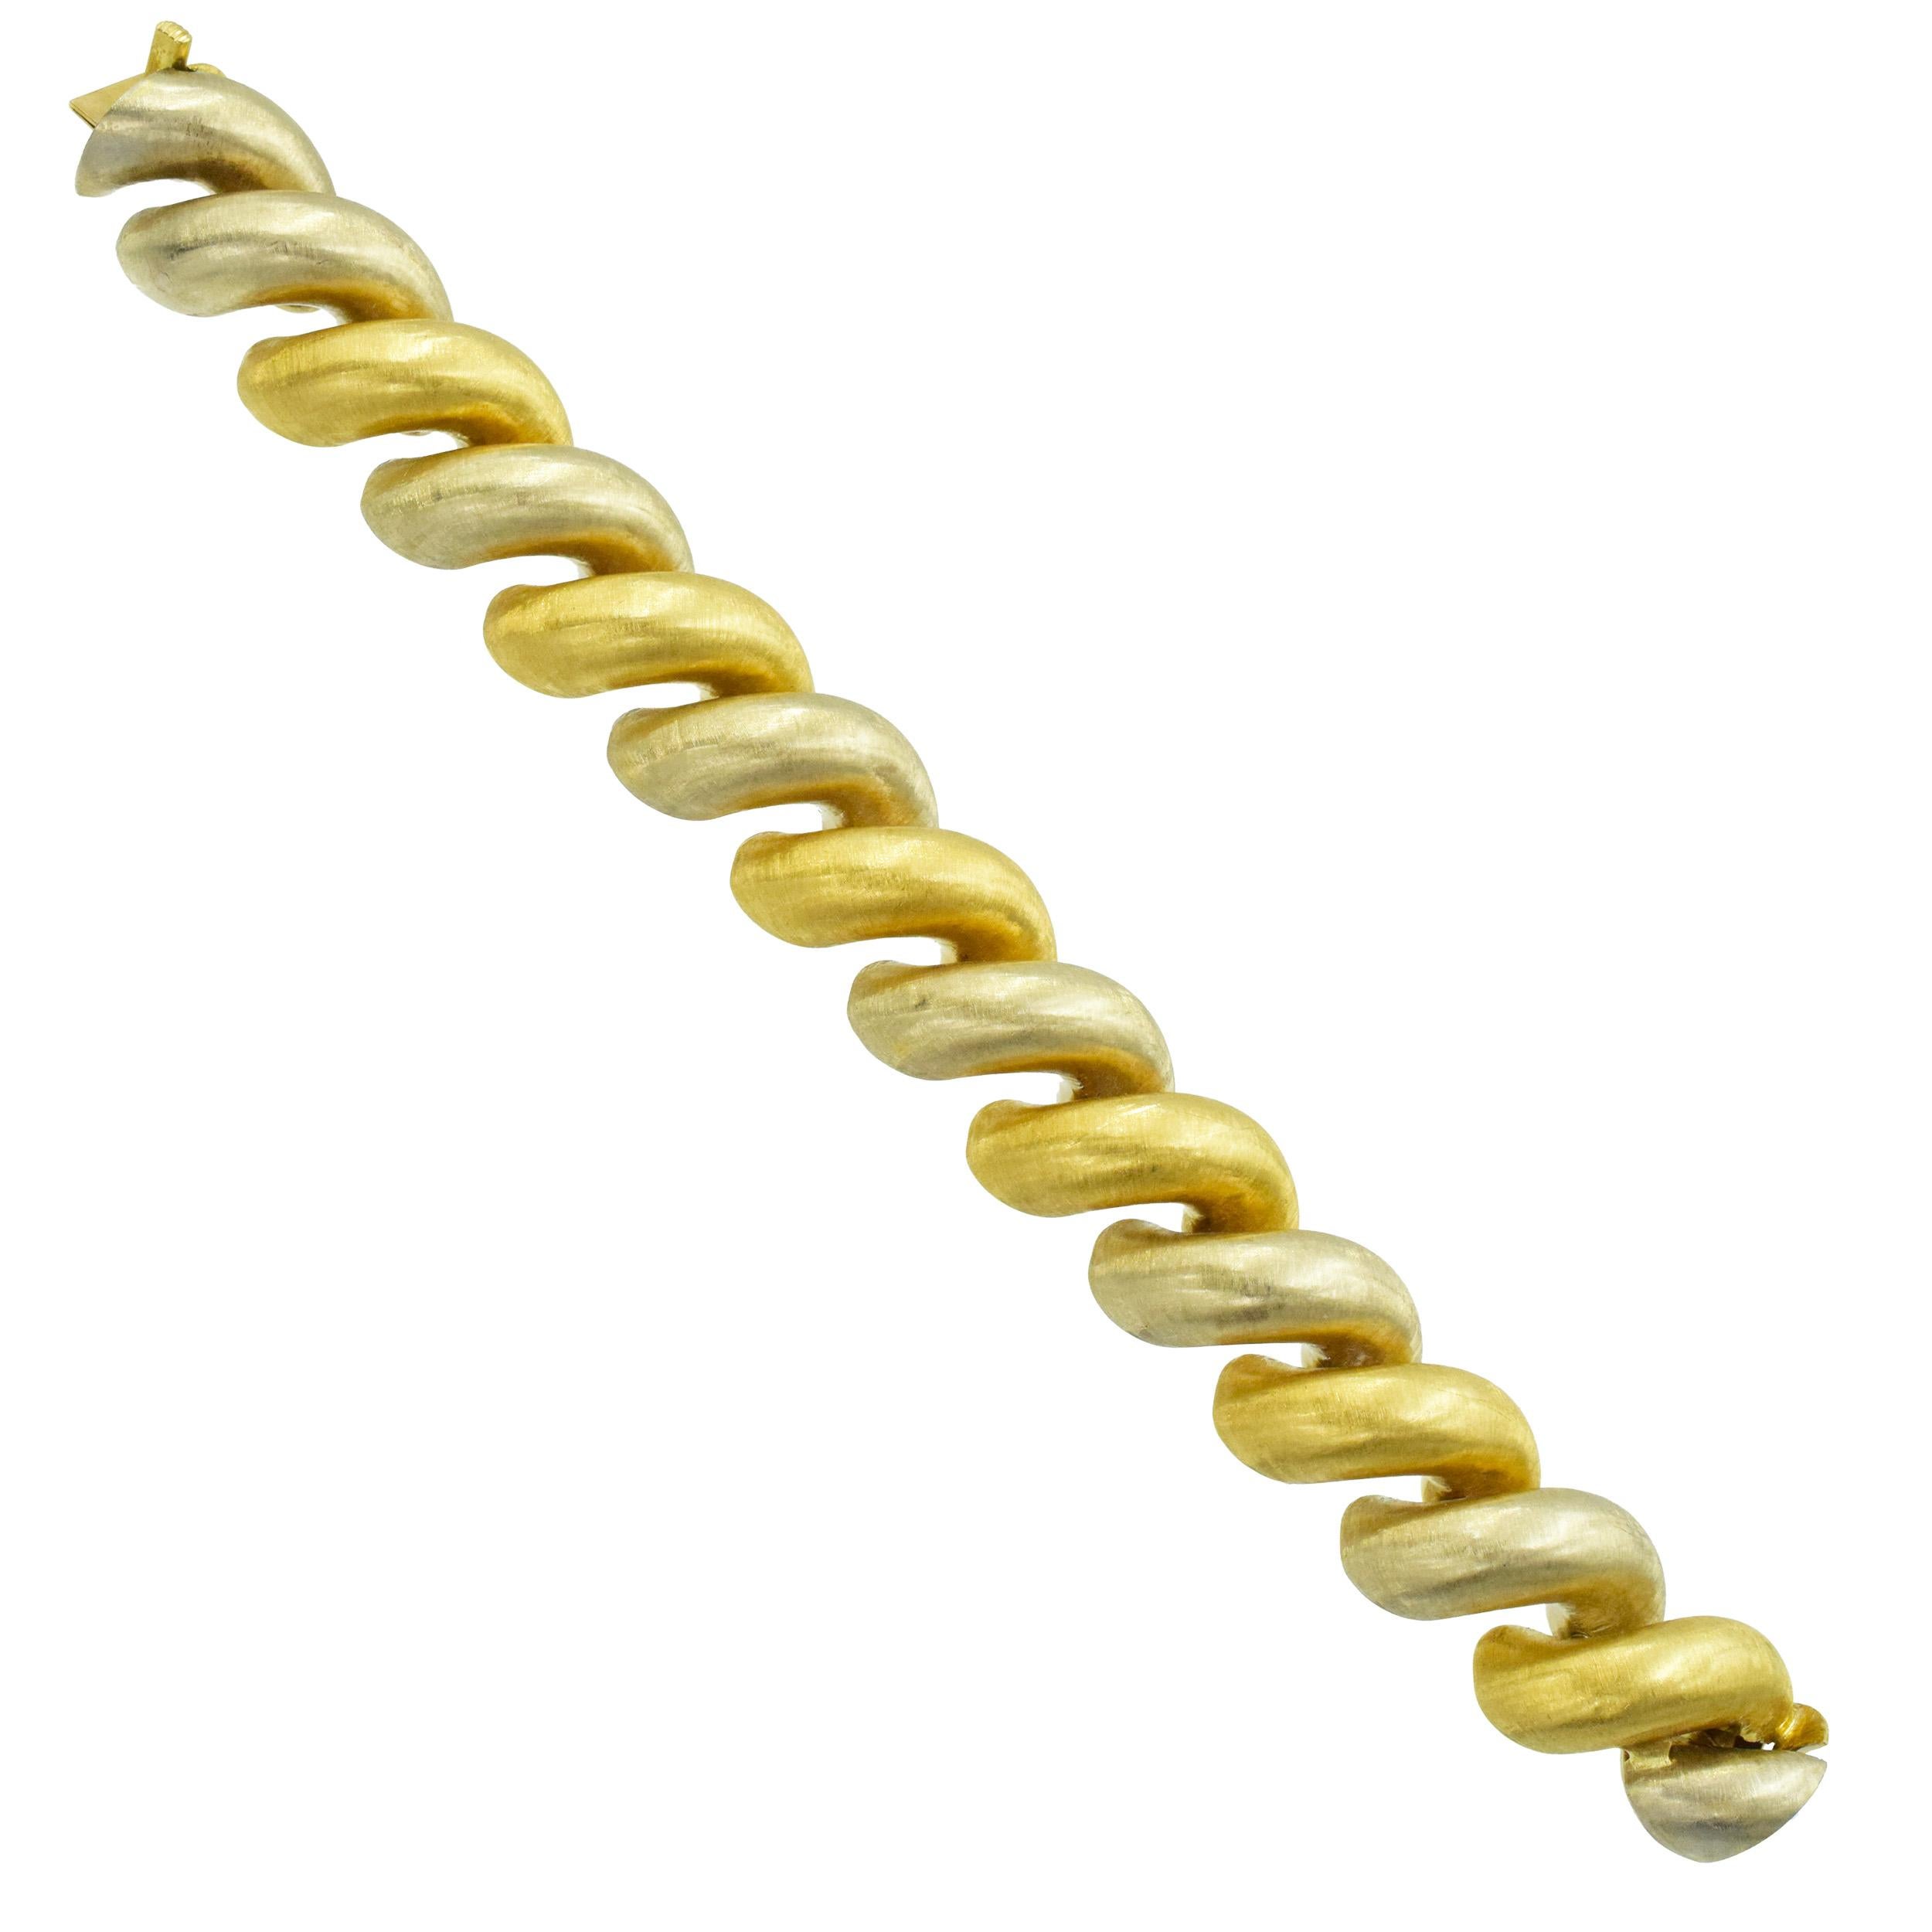 Buccellati Torchon San Marco Link bracelet in 18k two tone gold. The bracelet alternates
seven 18k yellow and six 18k white gold classic Macaroni slyle links with iconic Buccellati satin finish. Equipped with box clasp, secured with fold over safety